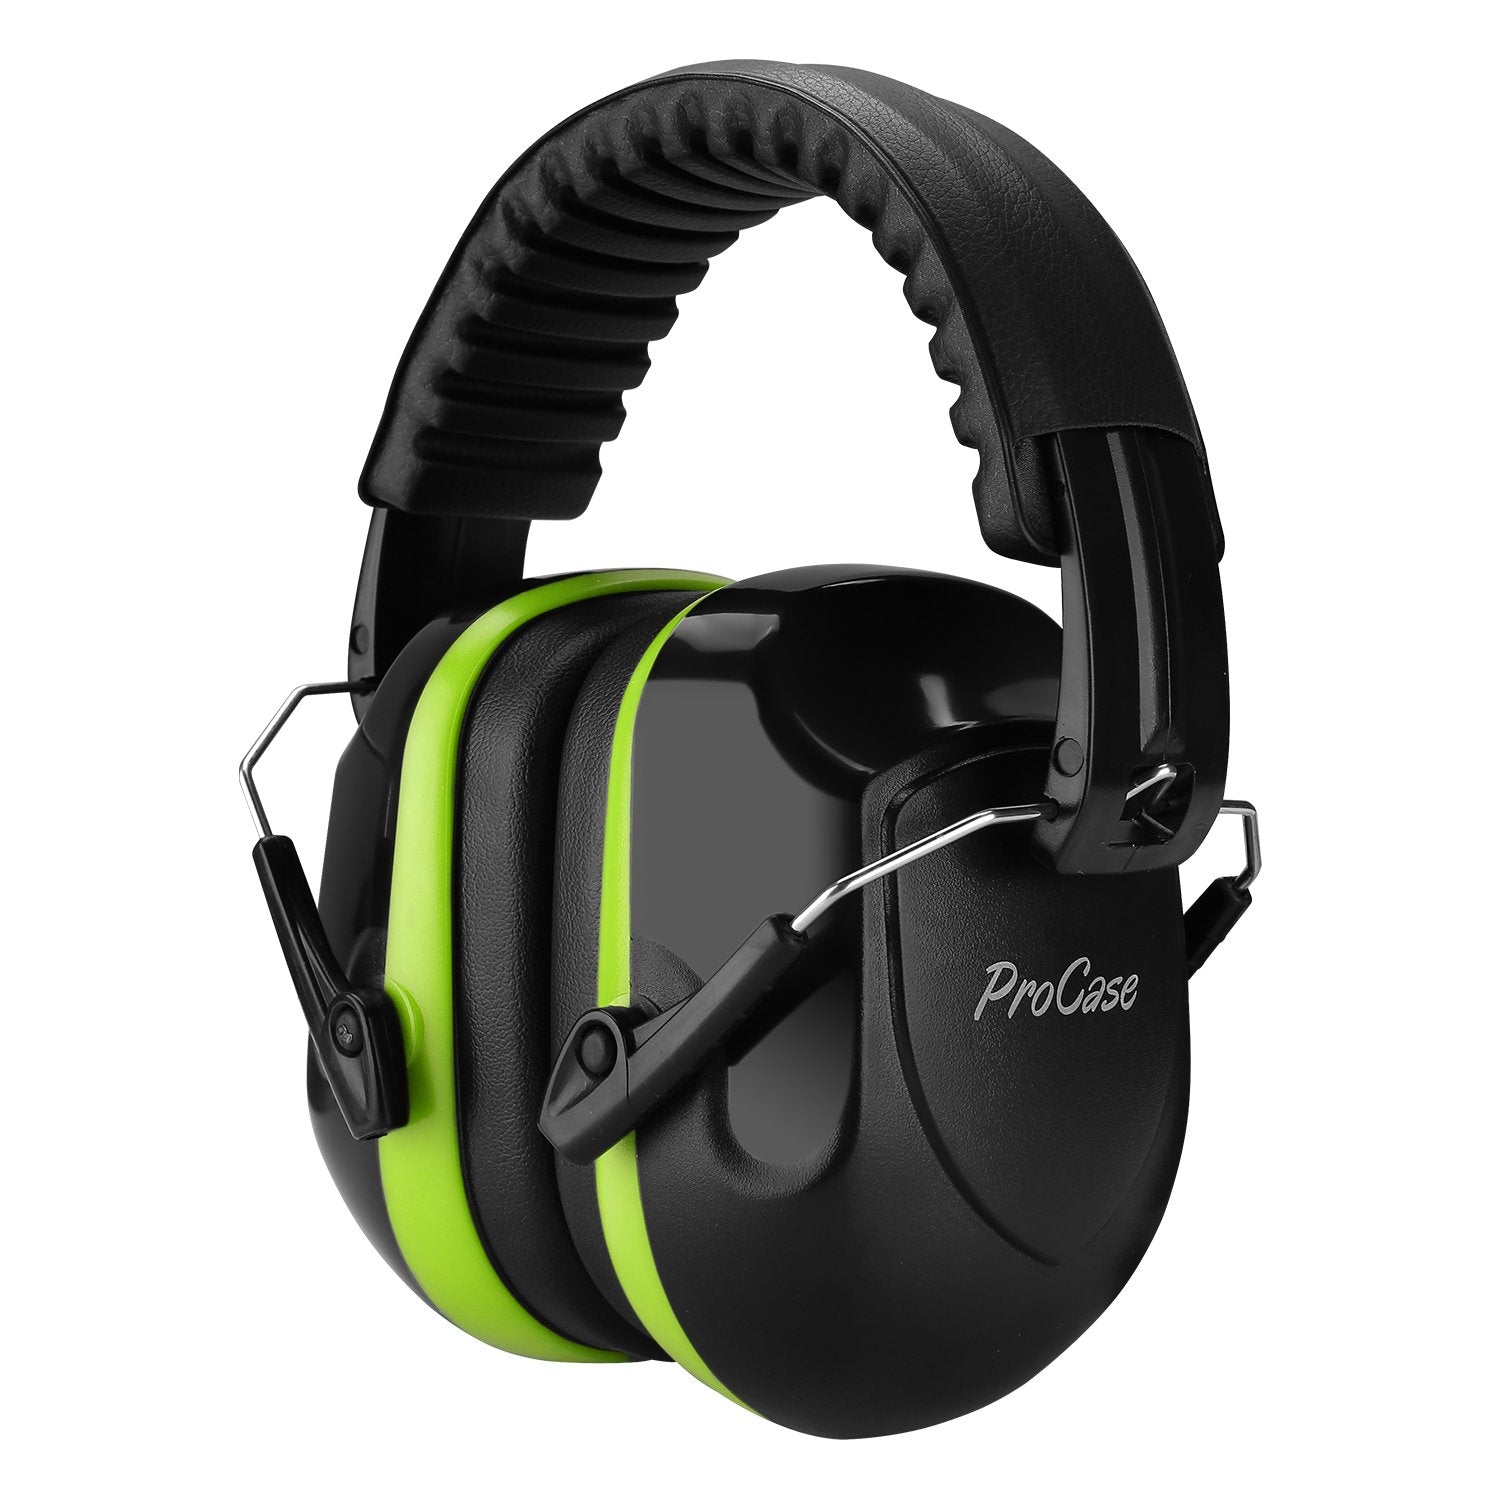 Noise Reduction Cancelling Ear Muffs Hearing Protection | ProCase green